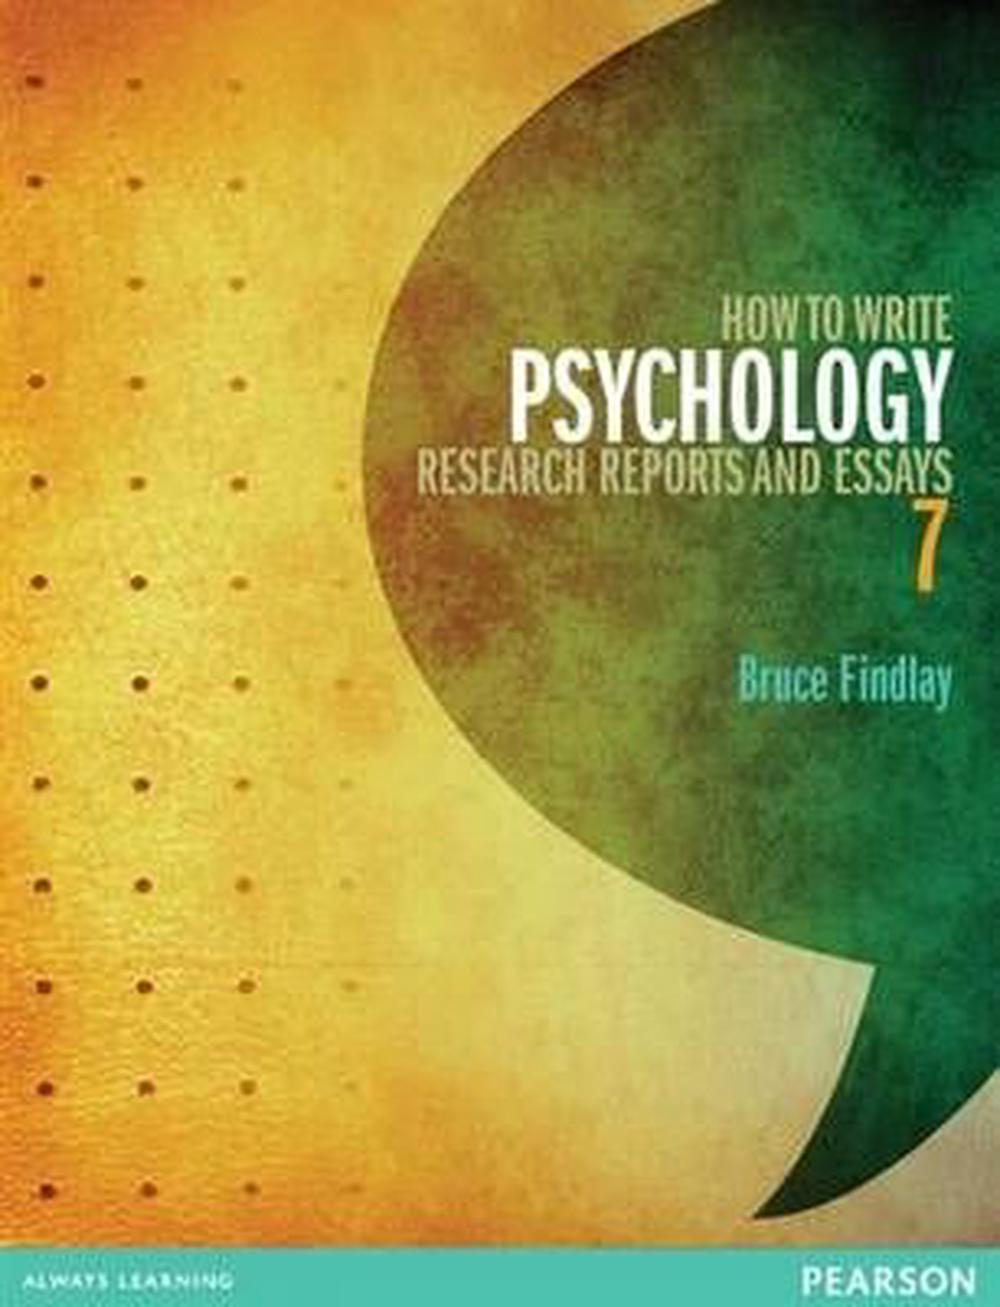 how to write psychology reports and essays